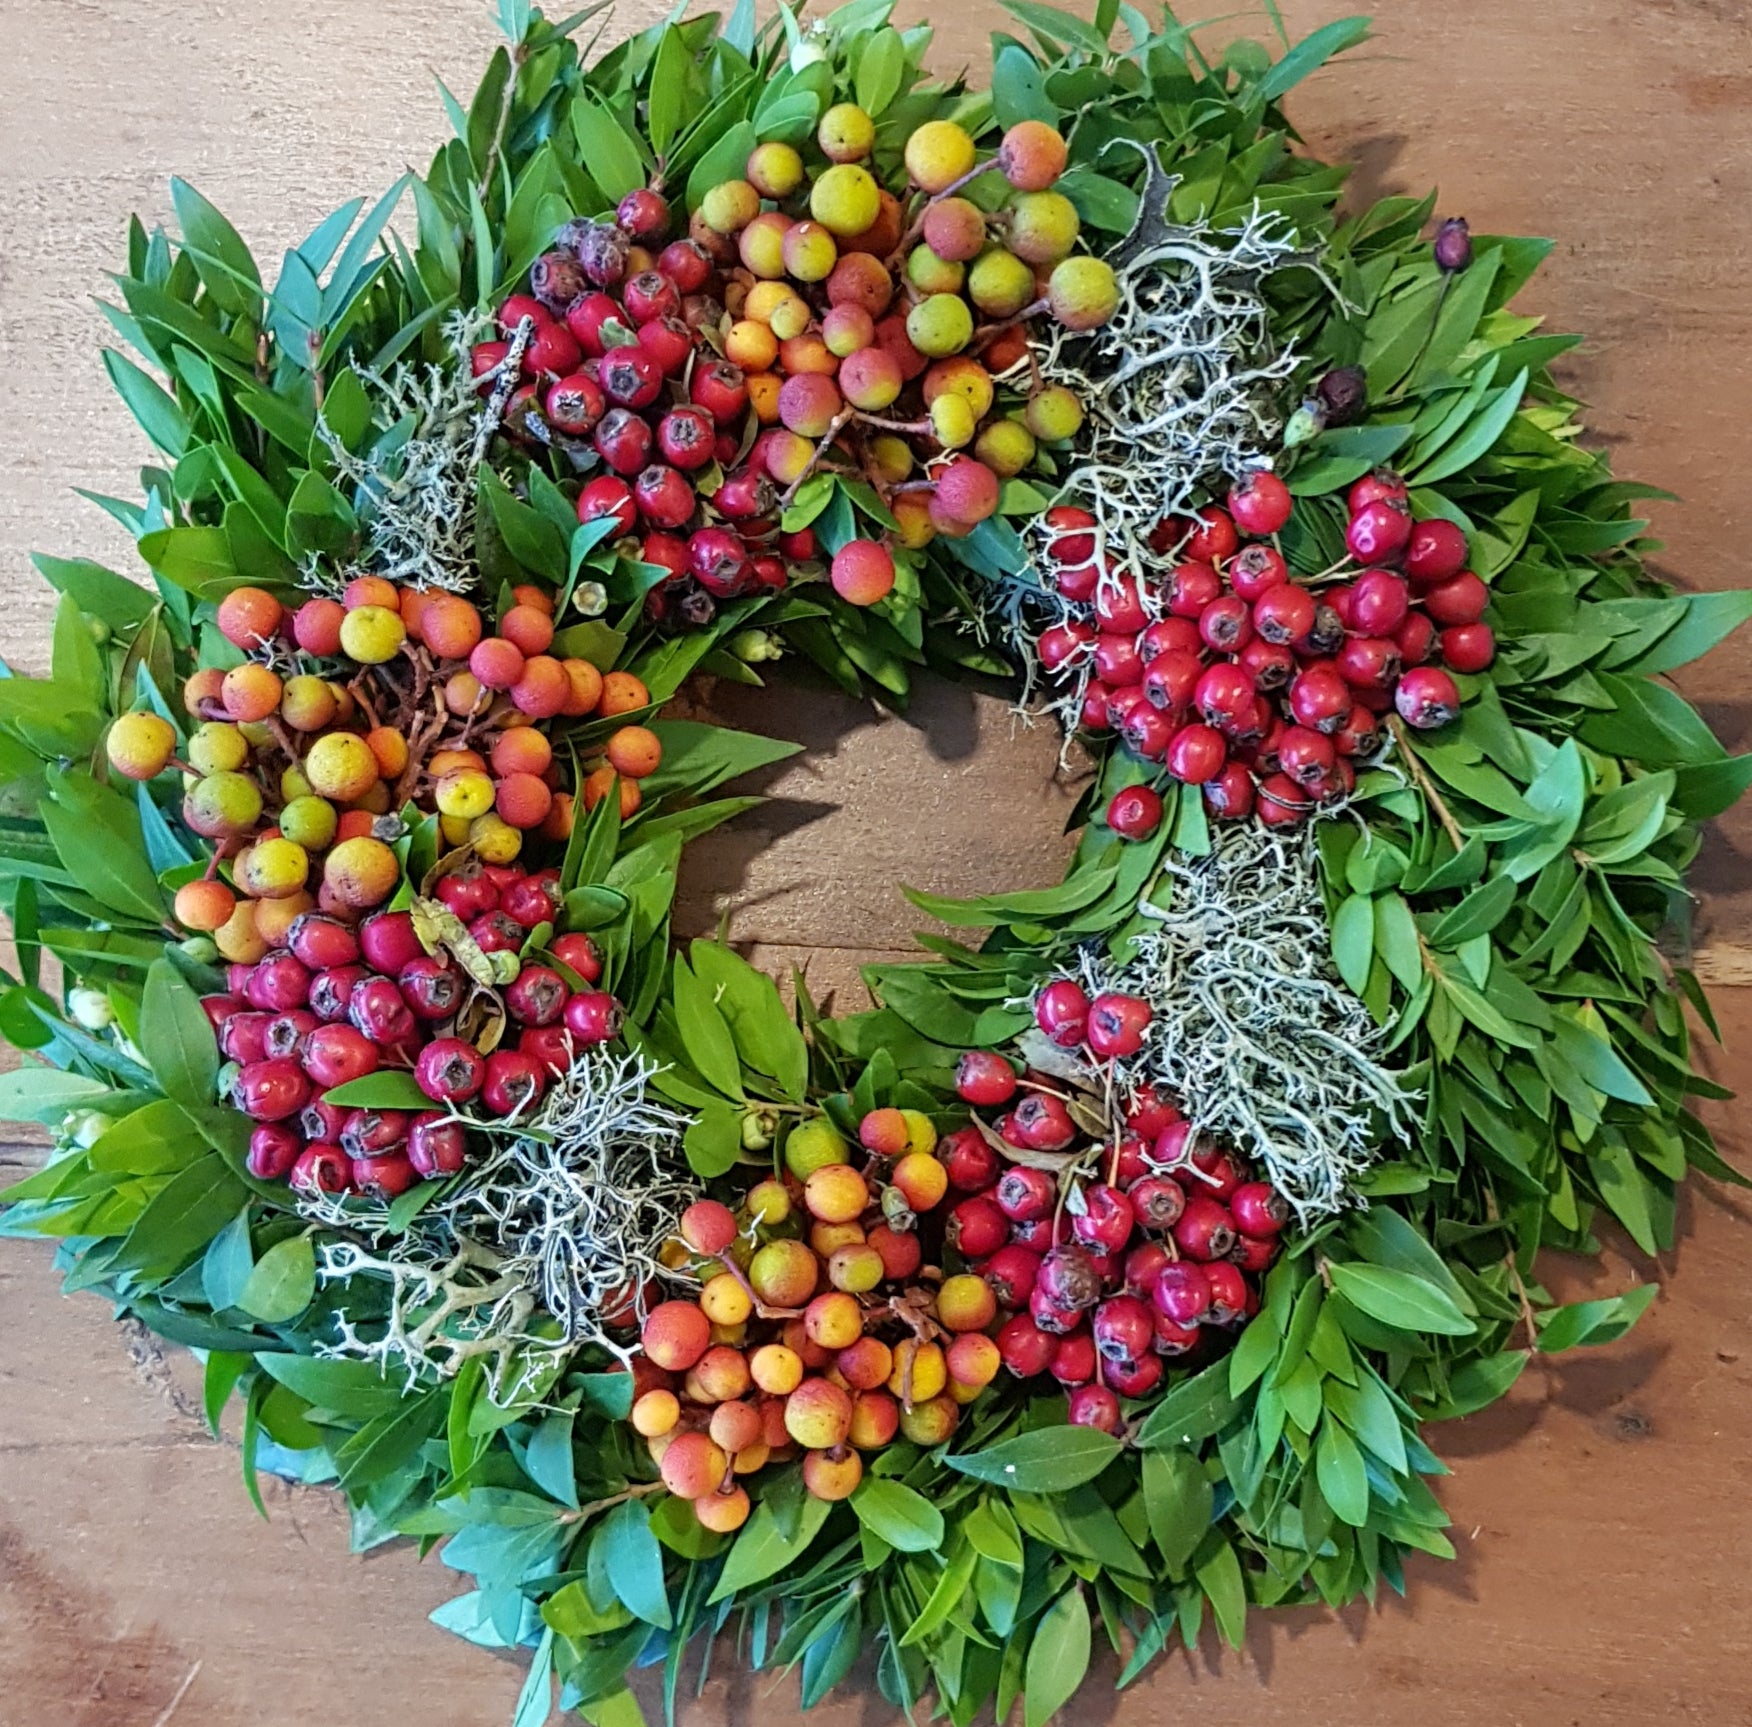 Turkish Wreath - Berries, Fruits and Foliage - 26cm (10")